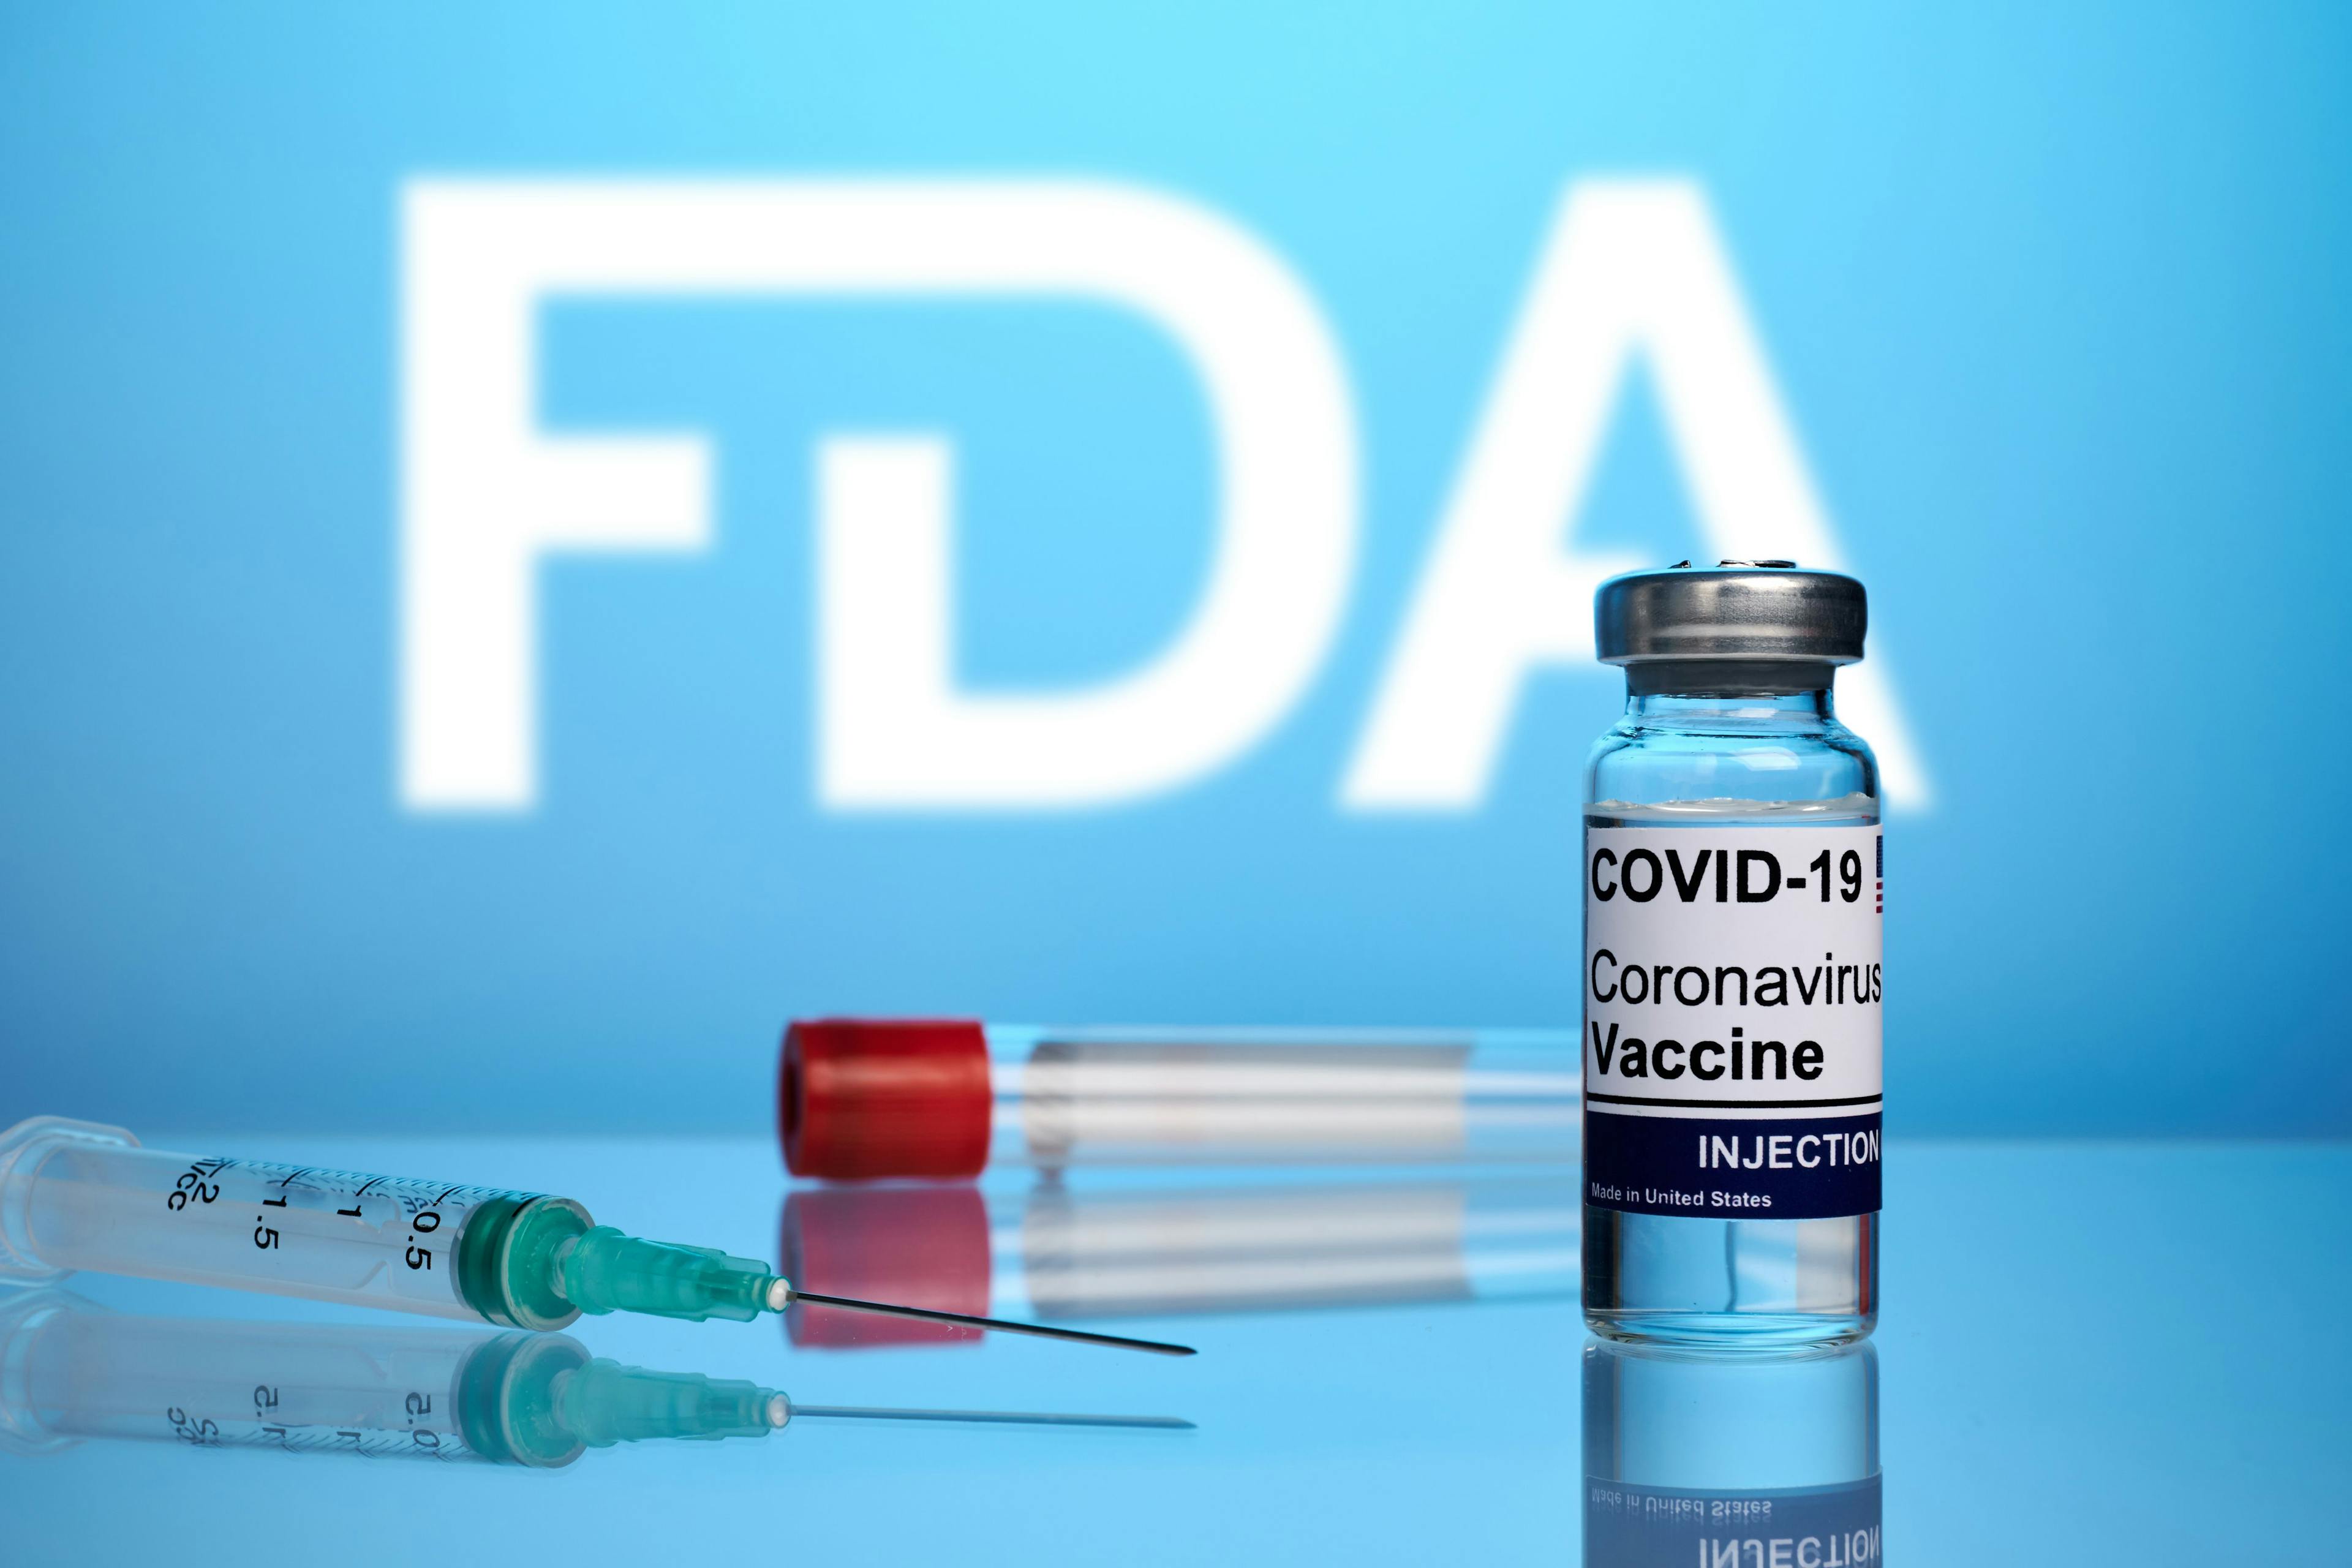 The FDA moved to harmonize primary and booster COVID-19 vaccine doses, deciding only the Moderna and Pfizer-BioNTech bivalent mRNA vaccines should be administered to individuals 6 months and older.